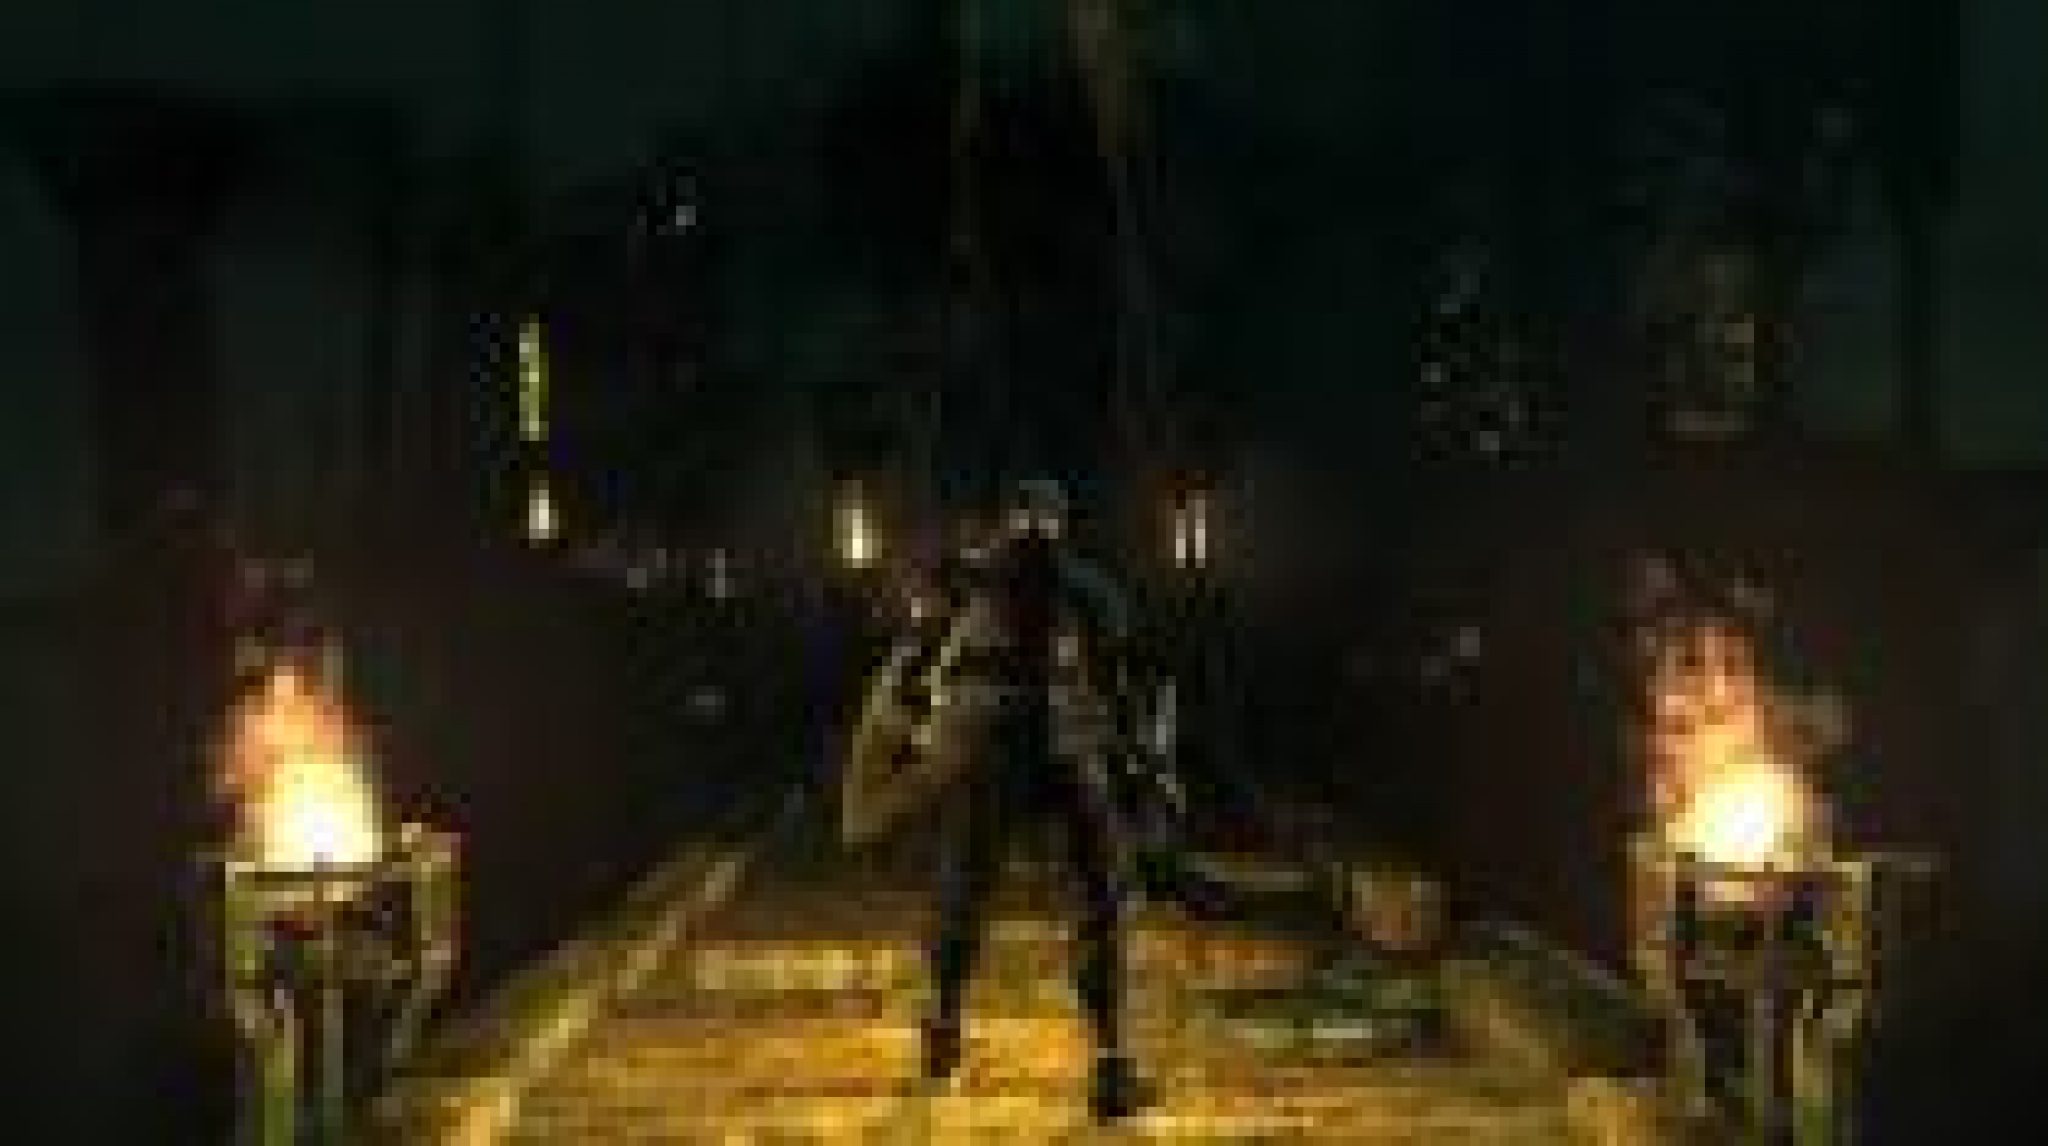 download demon souls pc for free